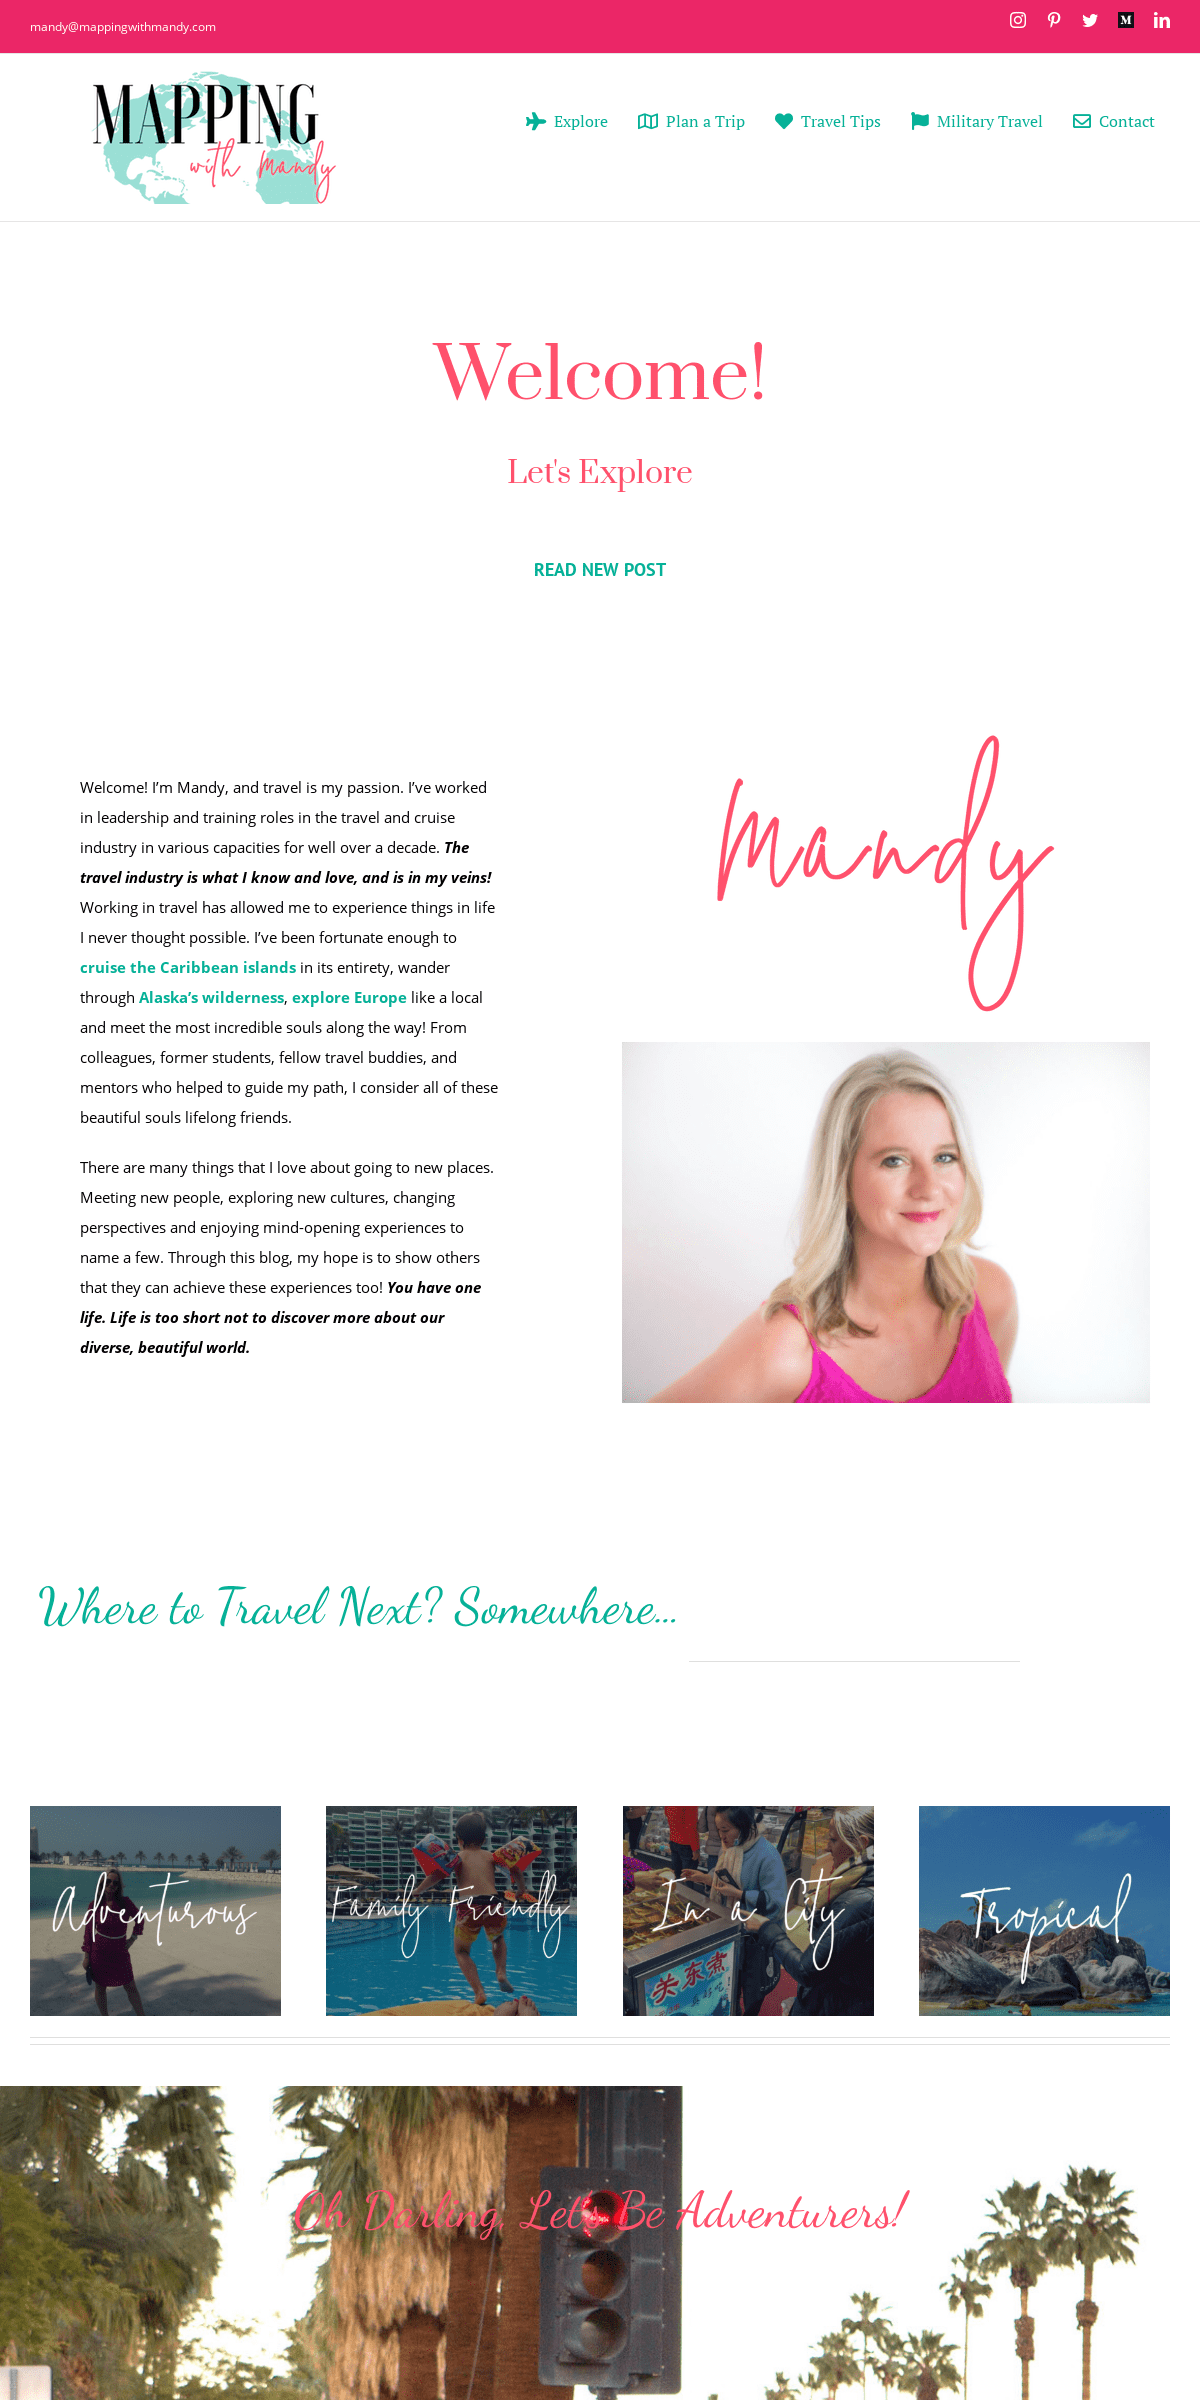 A complete backup of mappingwithmandy.com